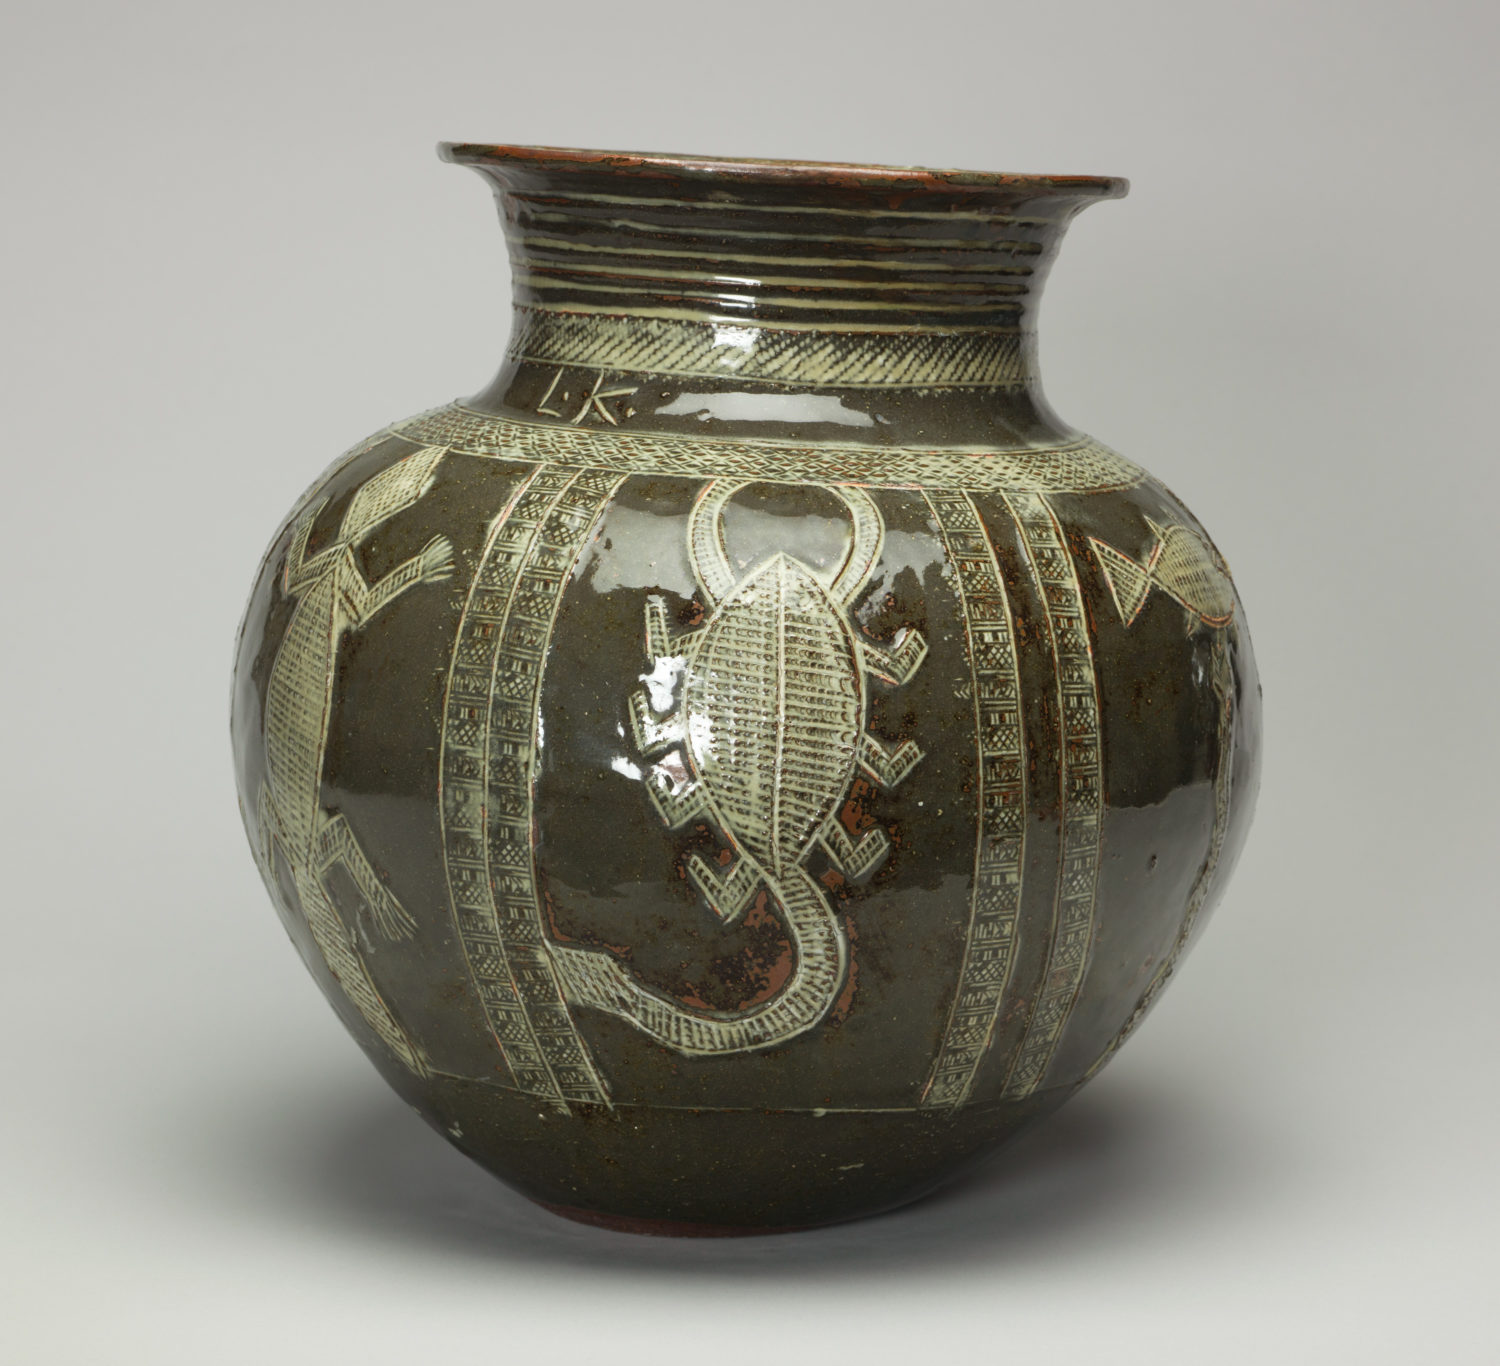 A green ceramic stoneware water jar. It is decorated with animals. This side shows a lizard, scorpion and fish.